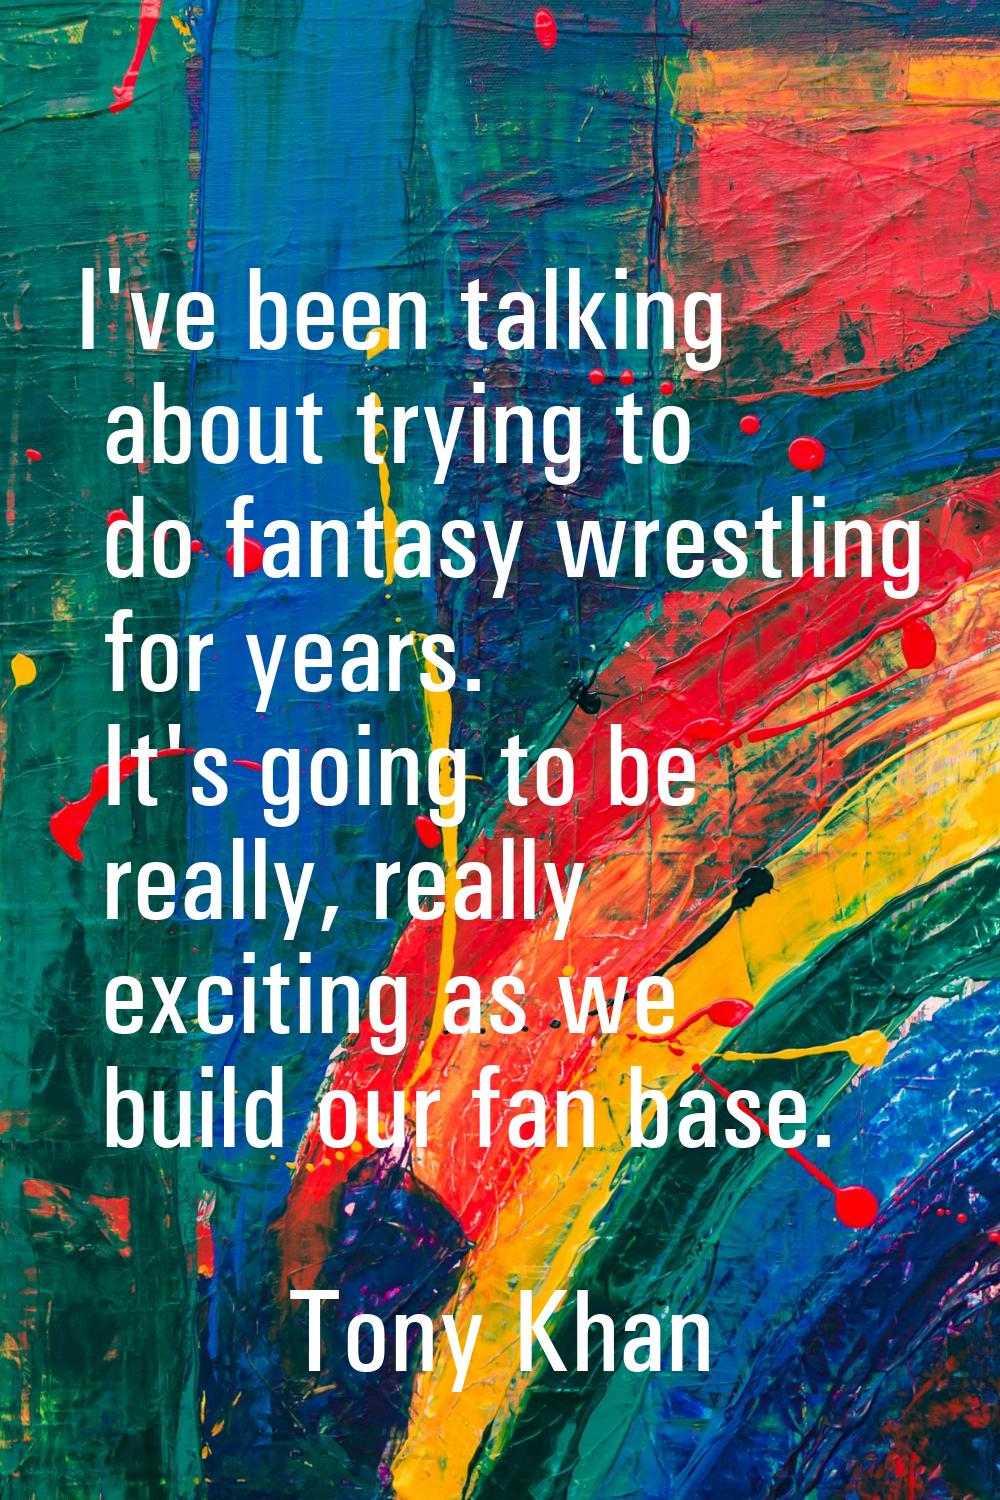 I've been talking about trying to do fantasy wrestling for years. It's going to be really, really e